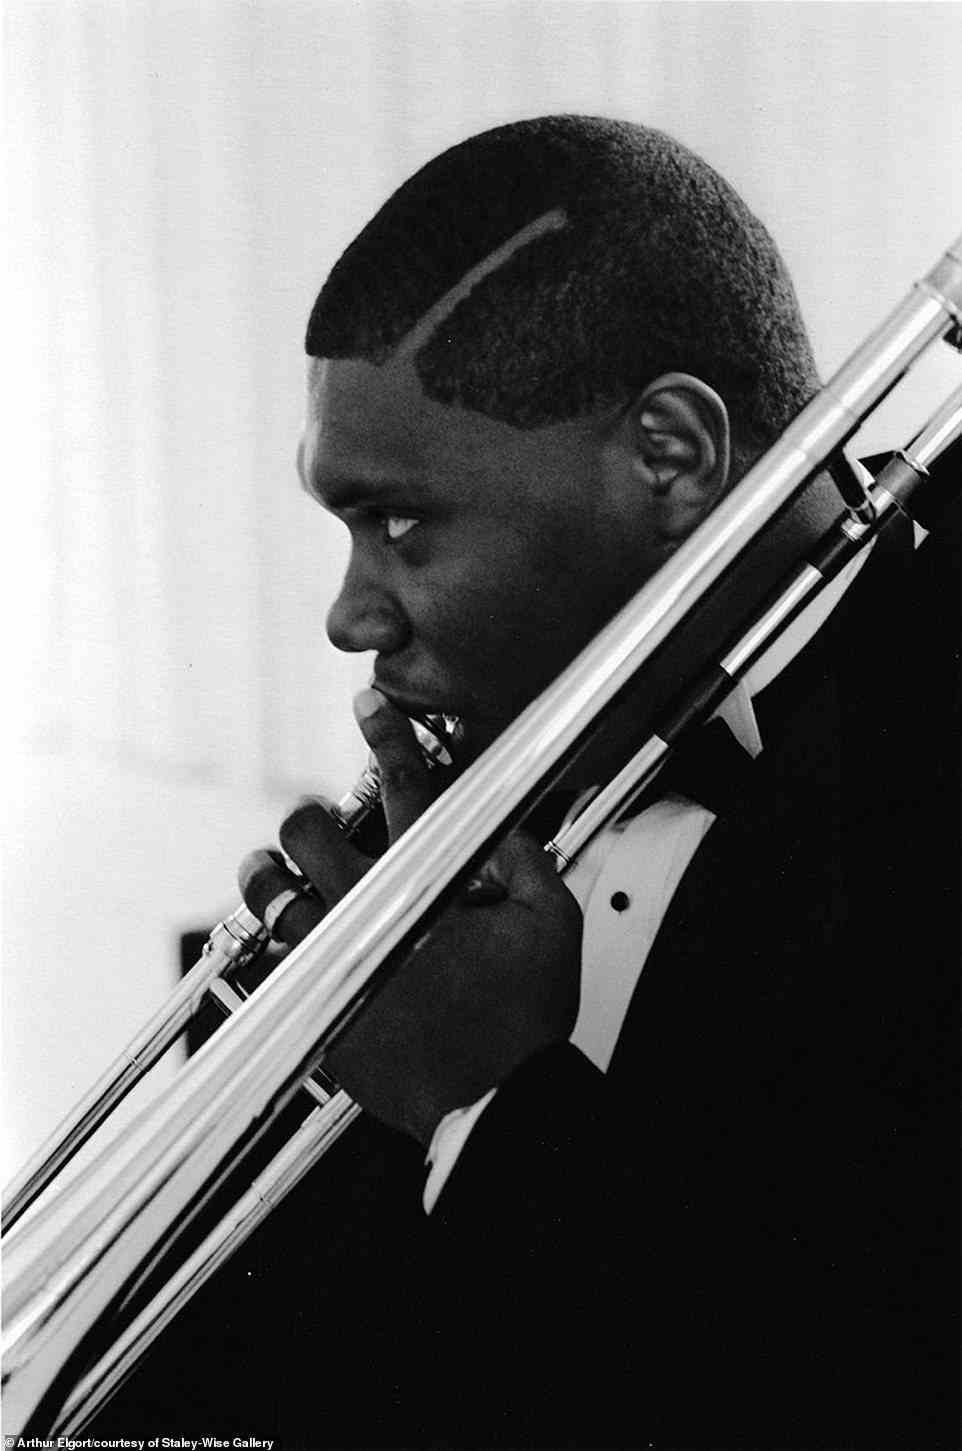 Elgort photographed trombonist Wycliffe Gordon performing in New York City in 1992